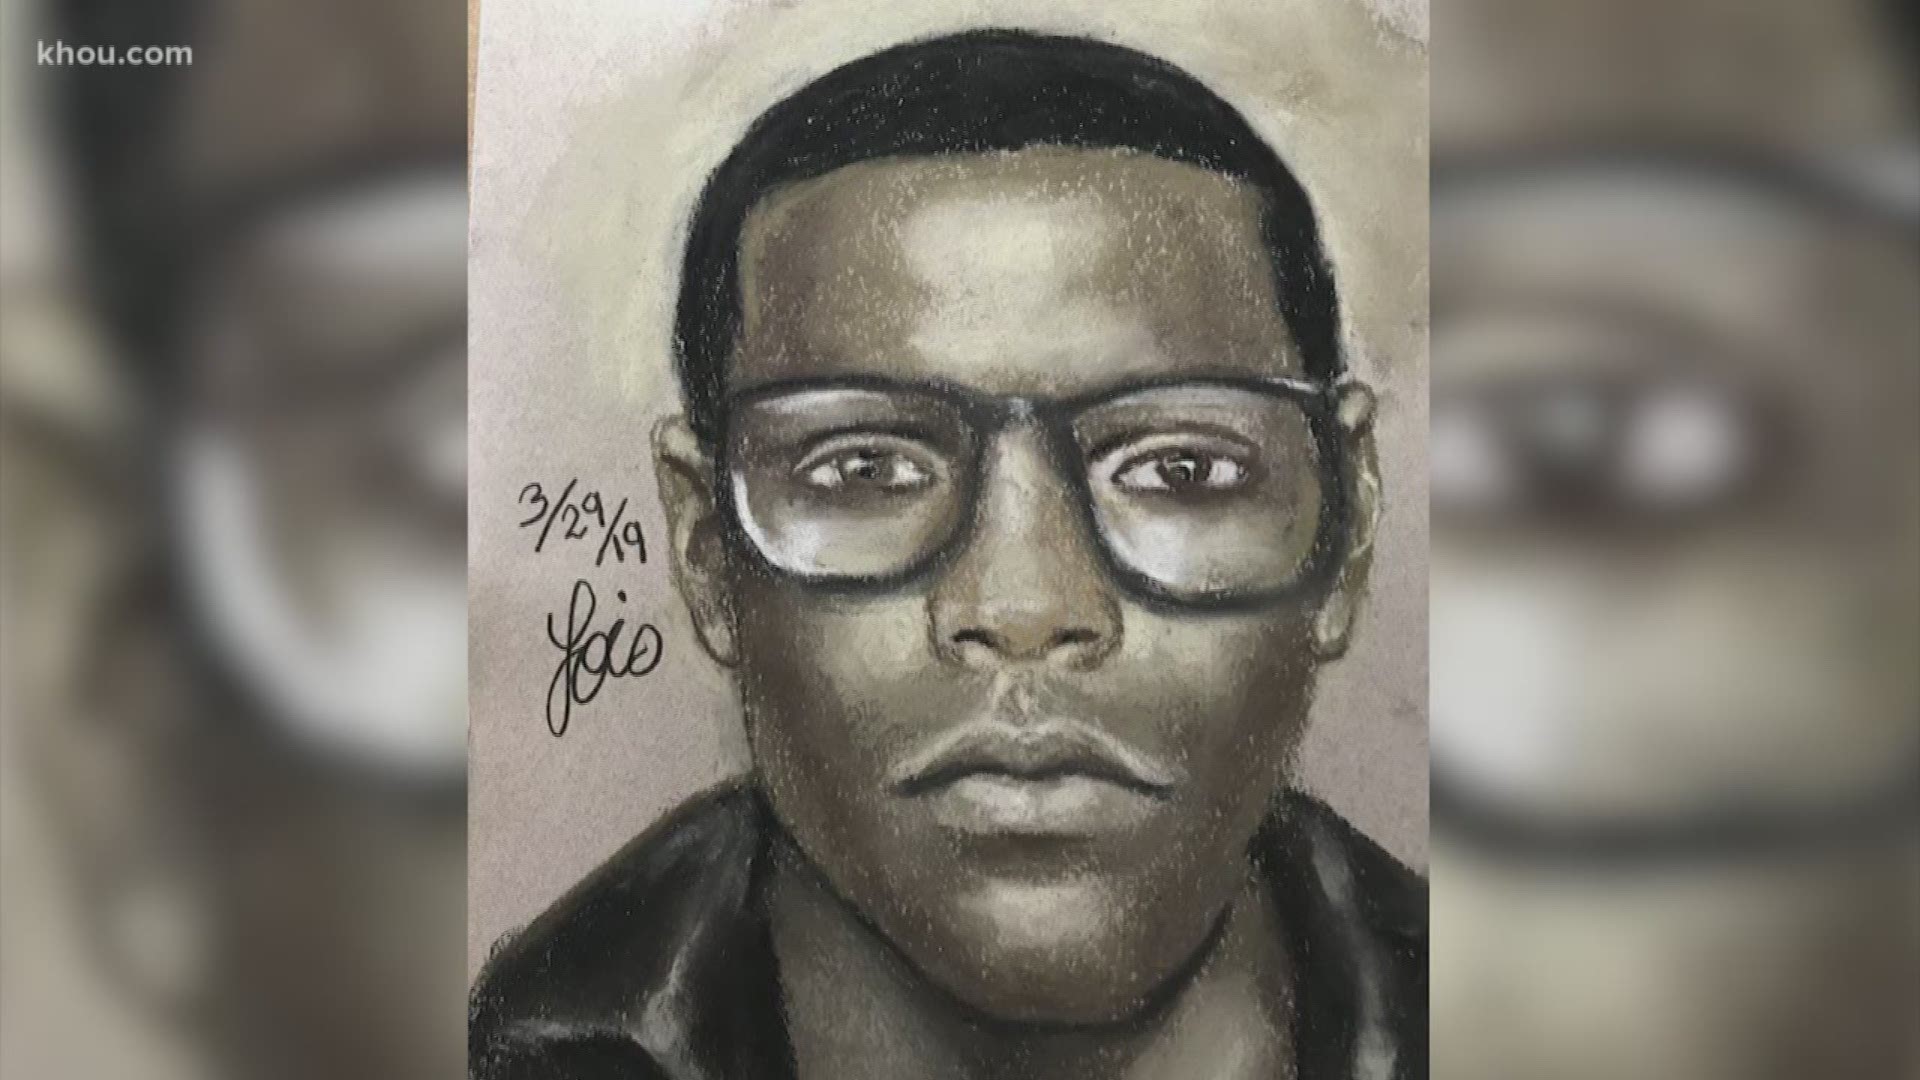 Officials have released the sketch of a suspect accused of robbing and forcing women to take off their clothes in a taco truck.